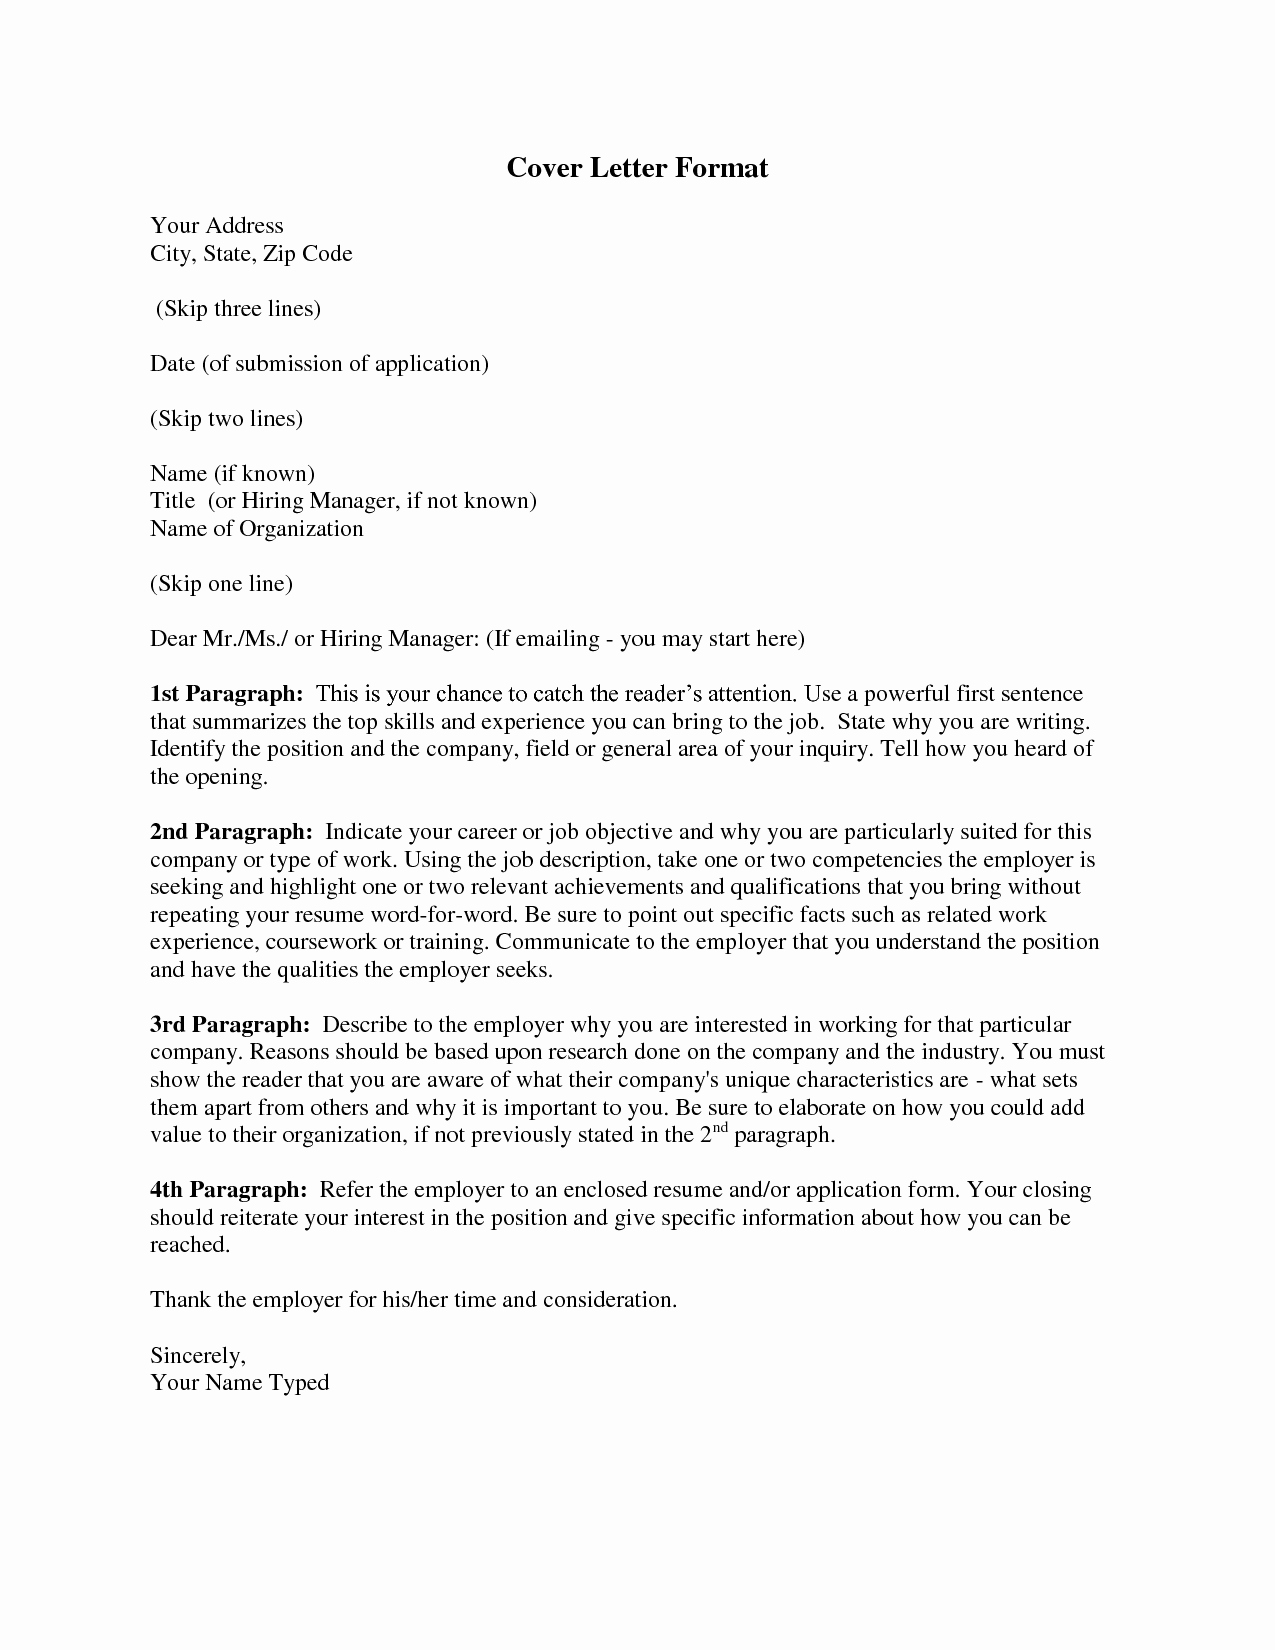 Cover Letter format for Personalizing Your Cover Letter